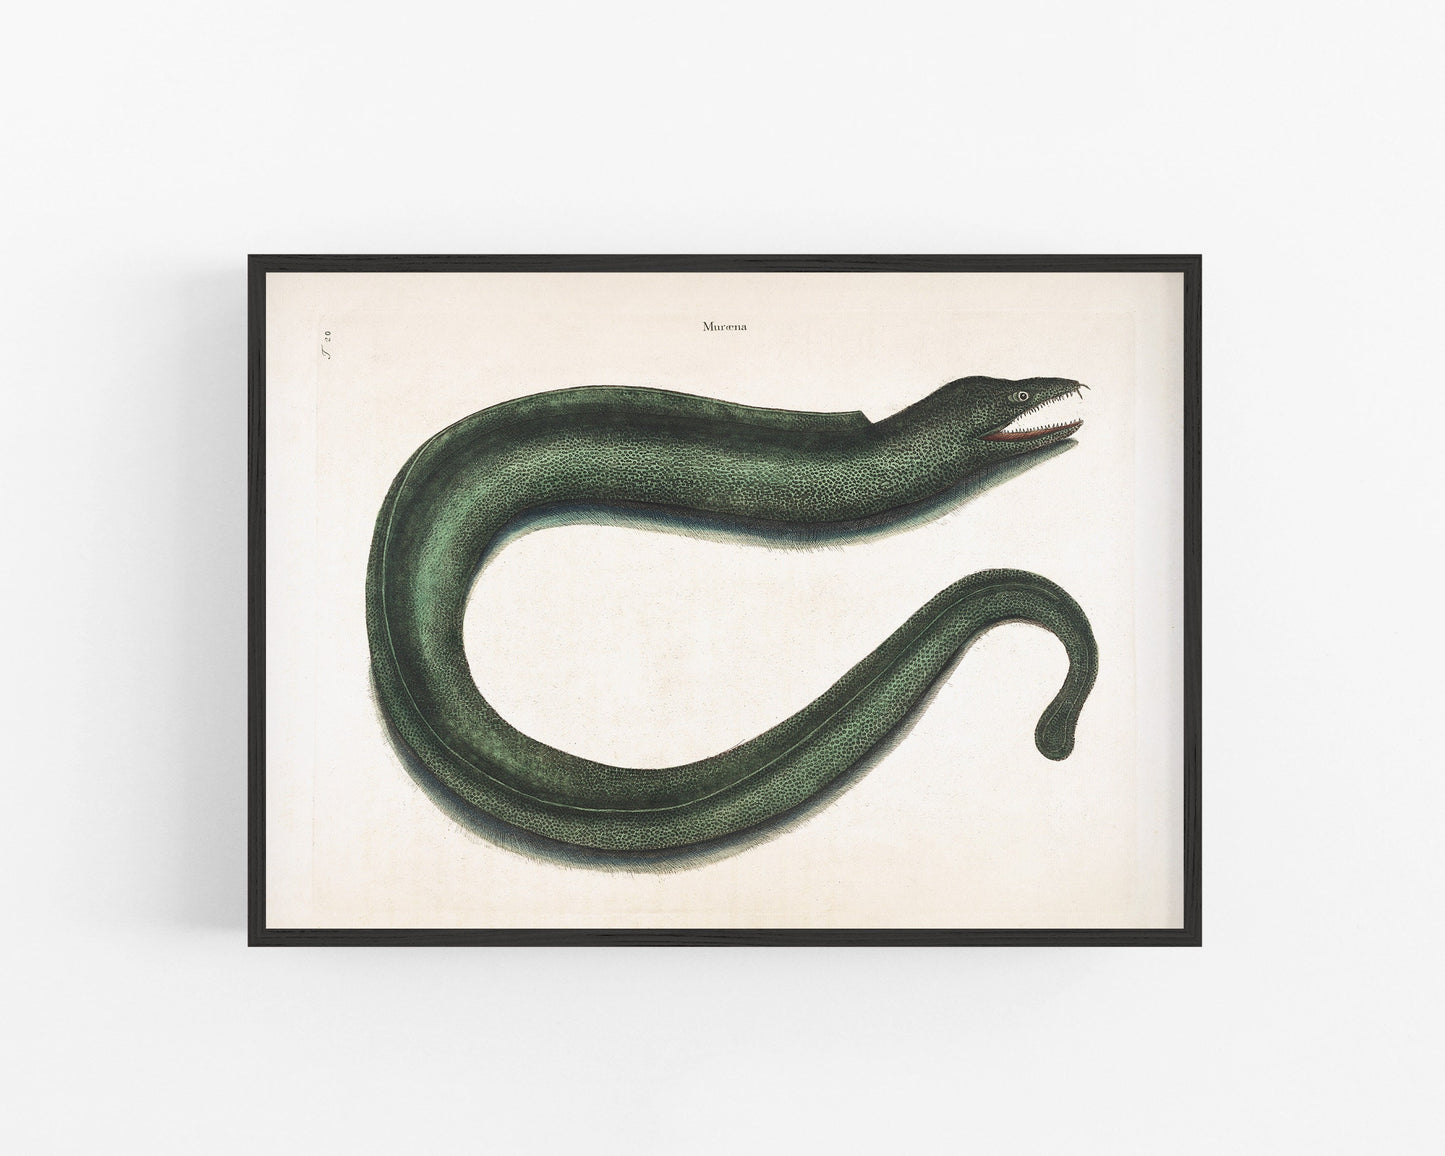 Antique eel art | 18th century Mark Catesby | Natural history illustration | Water, ocean animal | Modern vintage décor | Eco-friendly gift